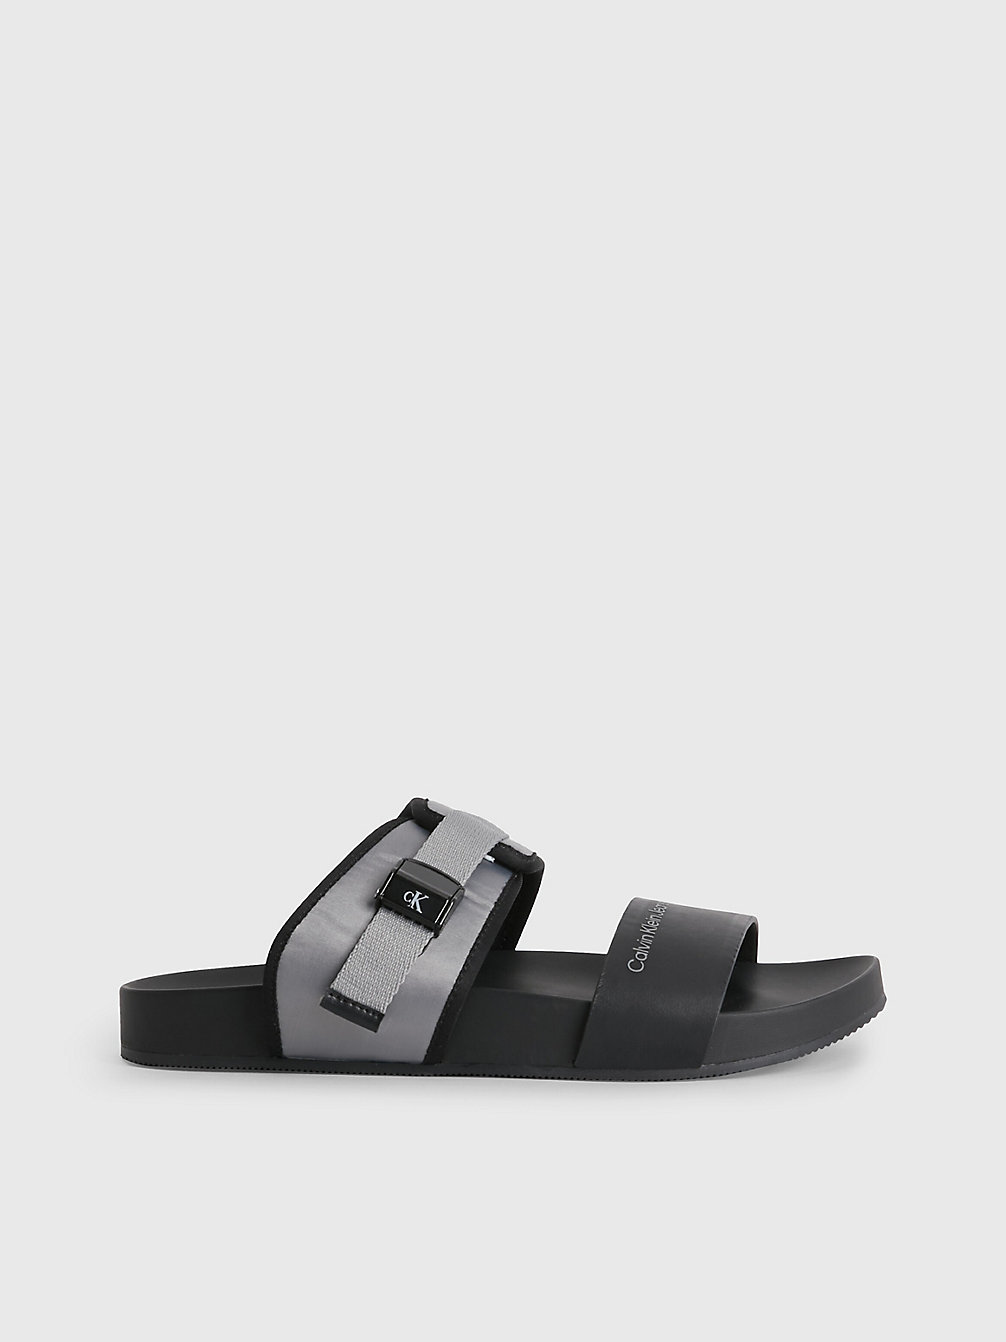 BLACK / OVERCAST GREY Recycled Sandals undefined women Calvin Klein